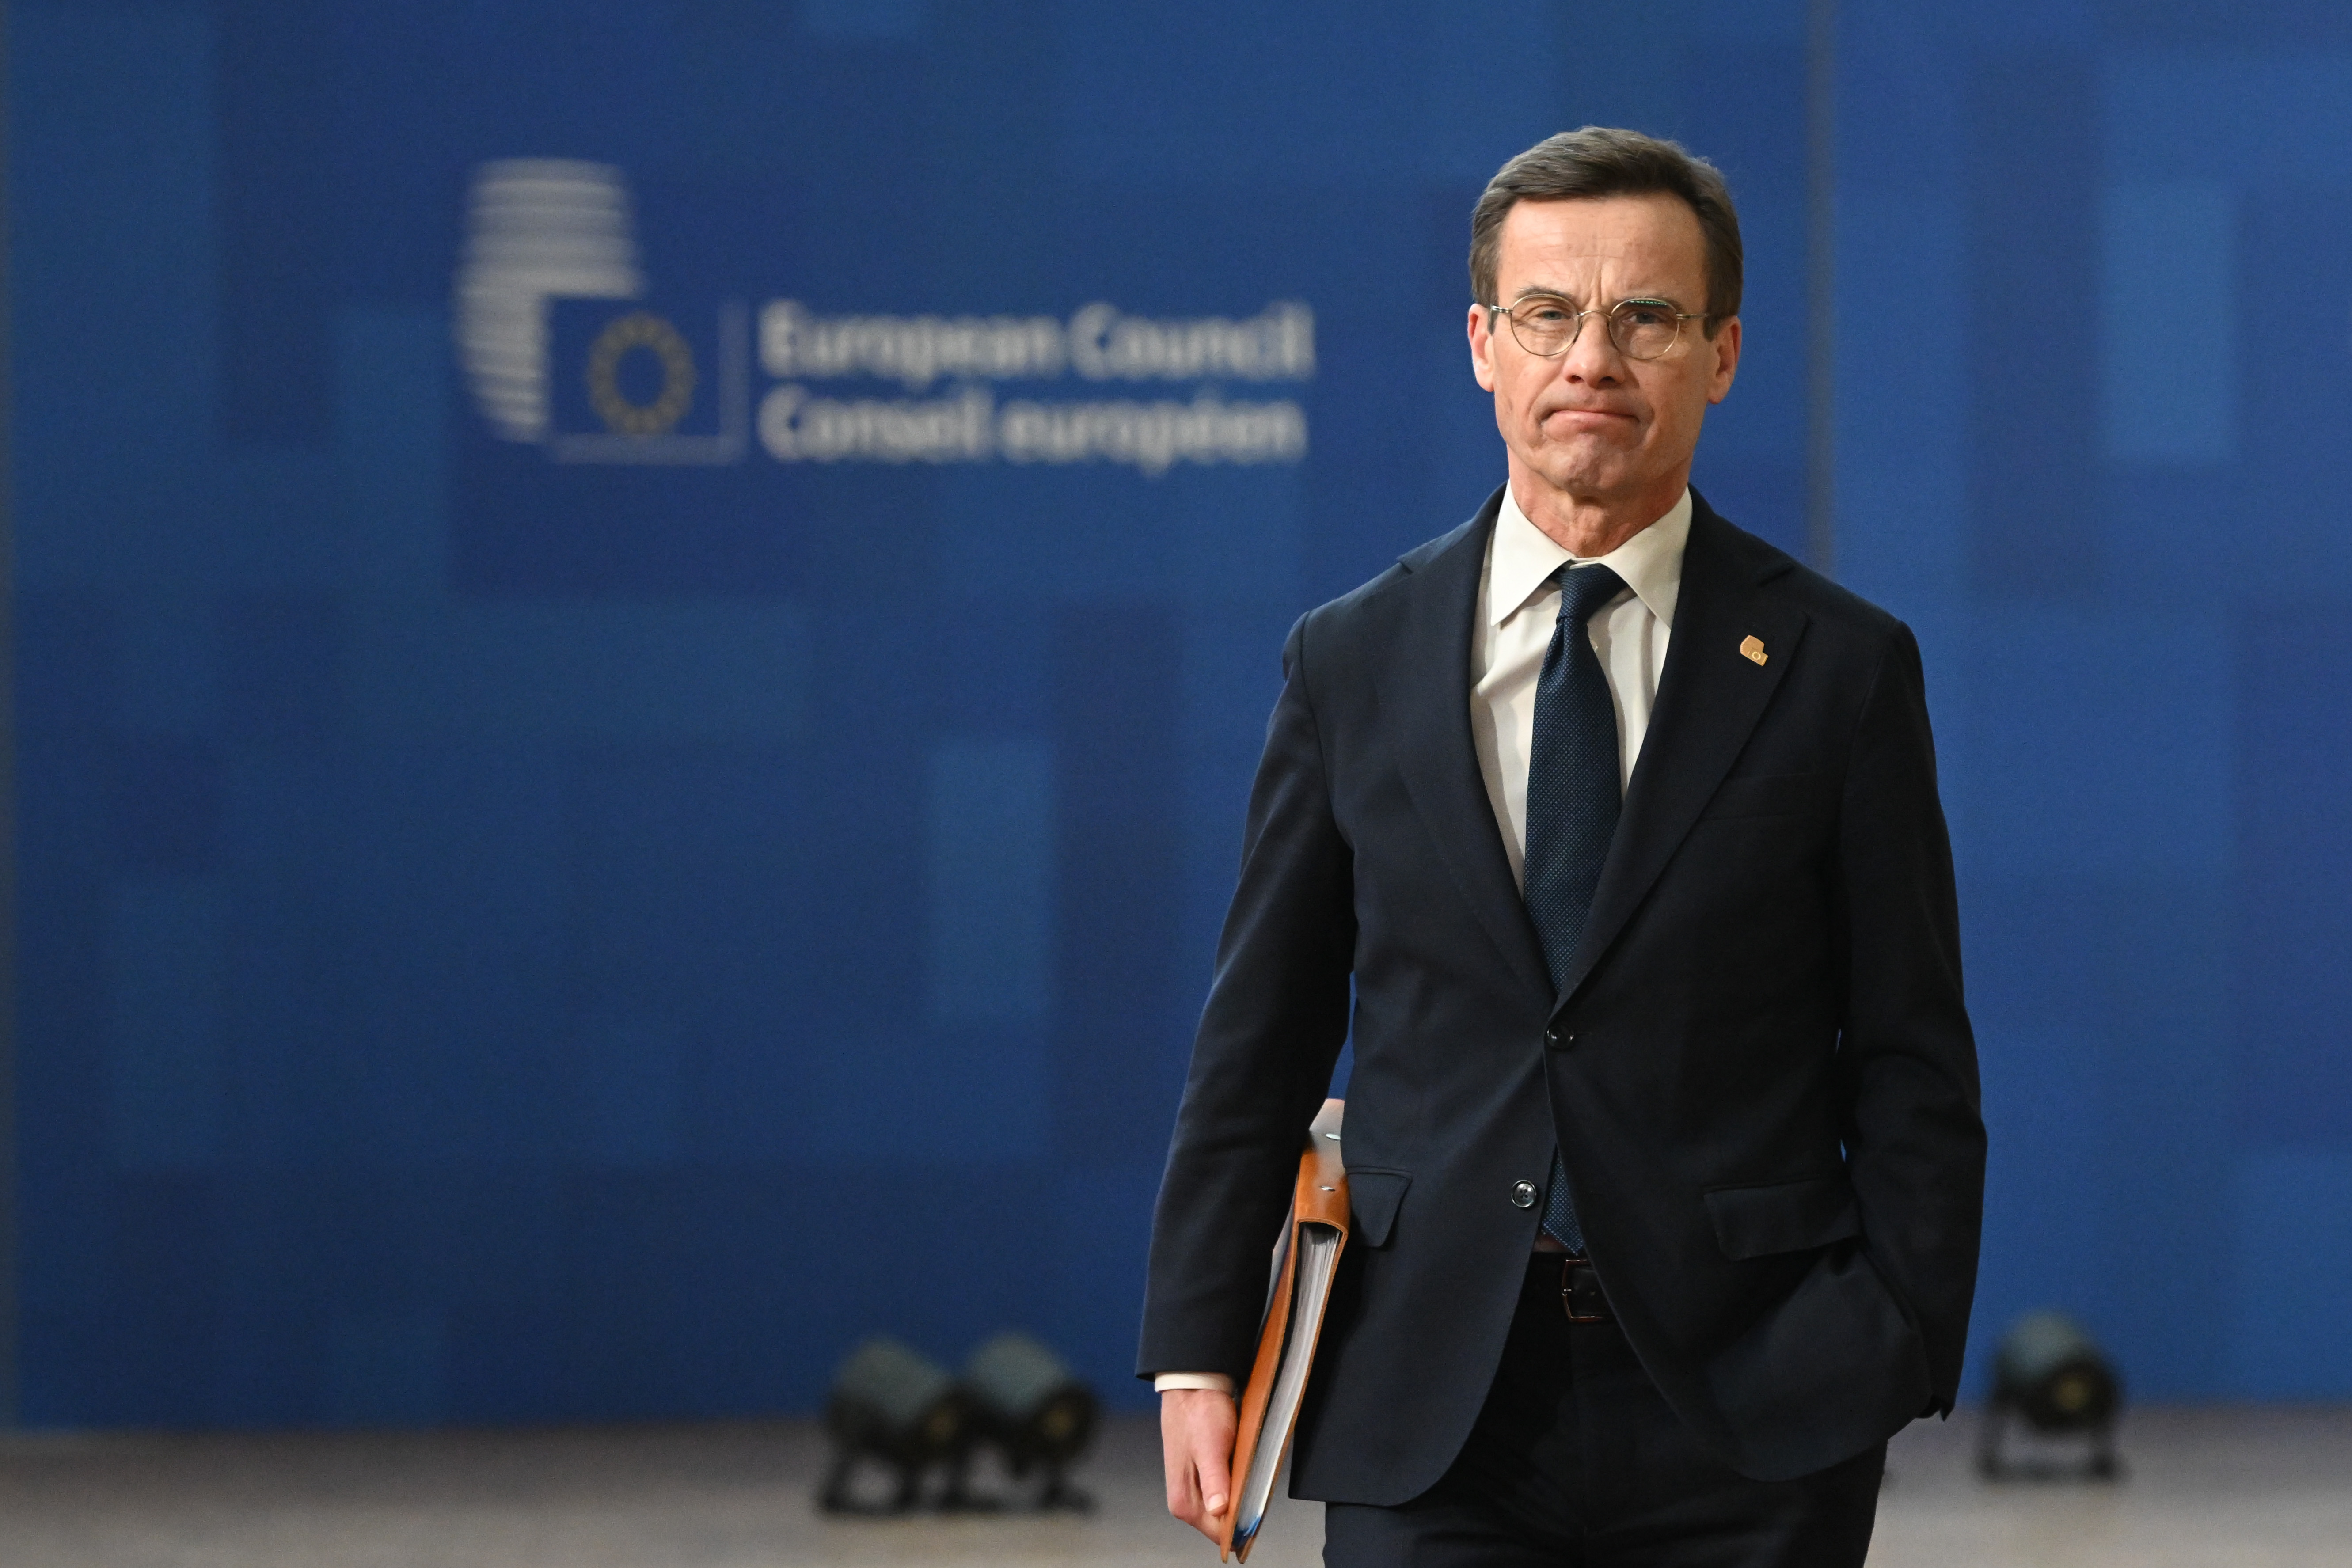 Swedish prime minister Ulf Kristersson in Brussels on Thursday (Photo: consilium.europa.eu)